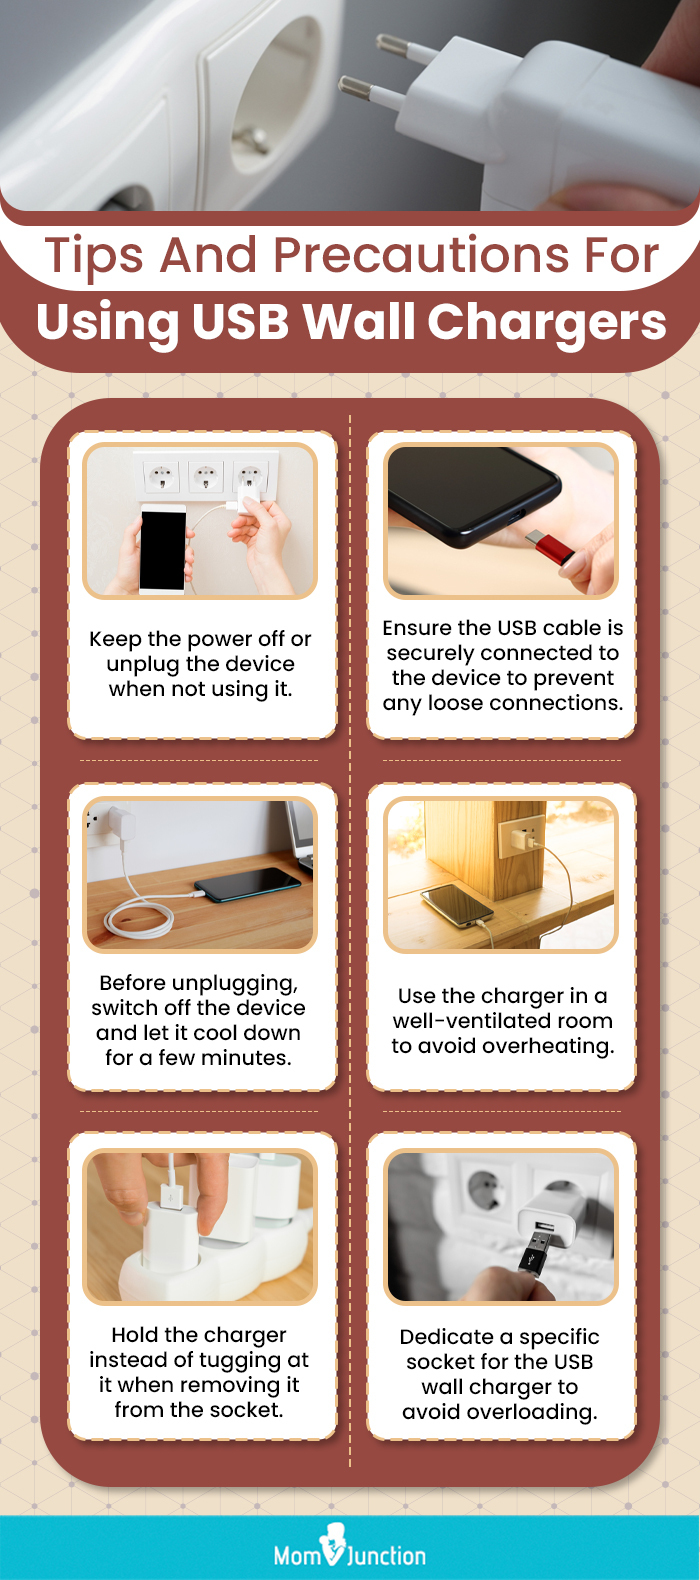 Tips And Precautions For Using USB Wall Chargers (infographic)